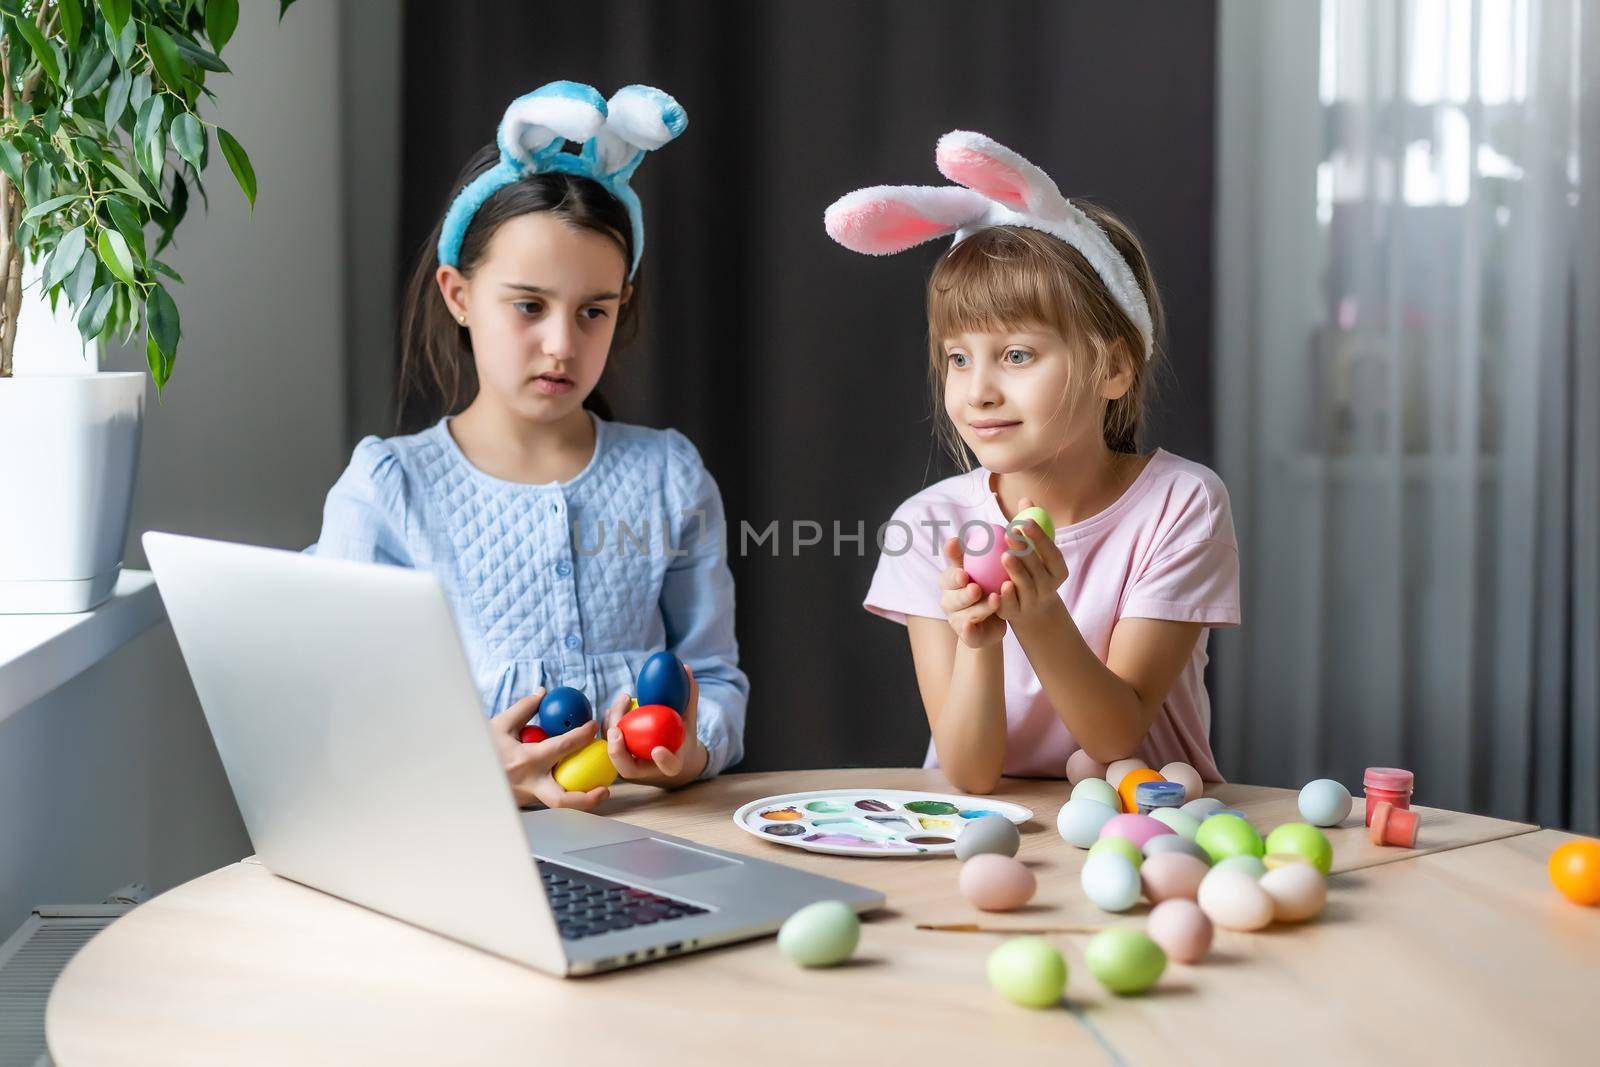 little girls for easter paint eggs, record lessons on web camera with laptop by Andelov13